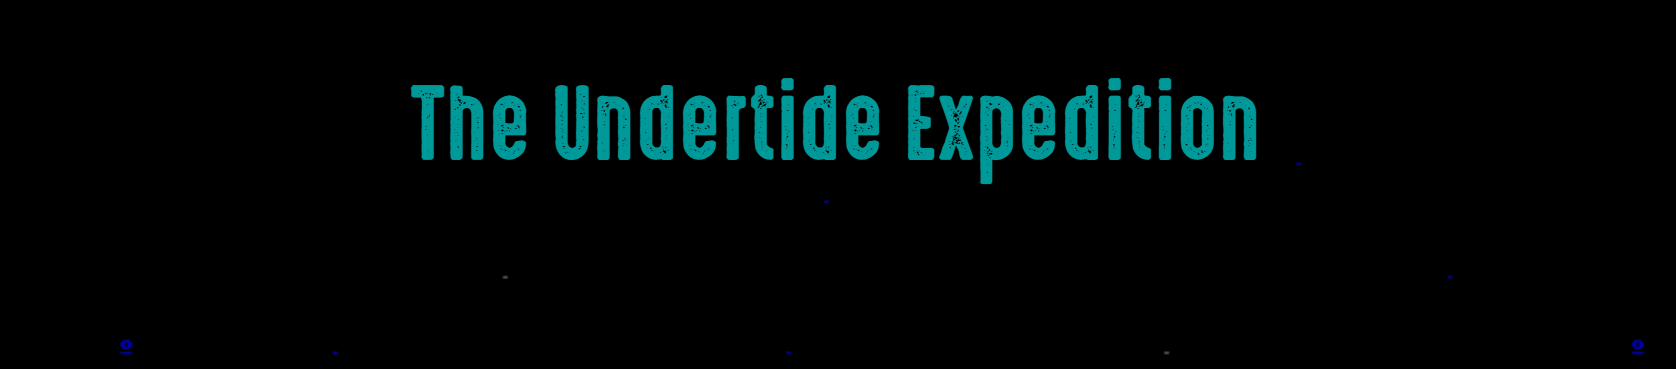 The Undertide Expedition